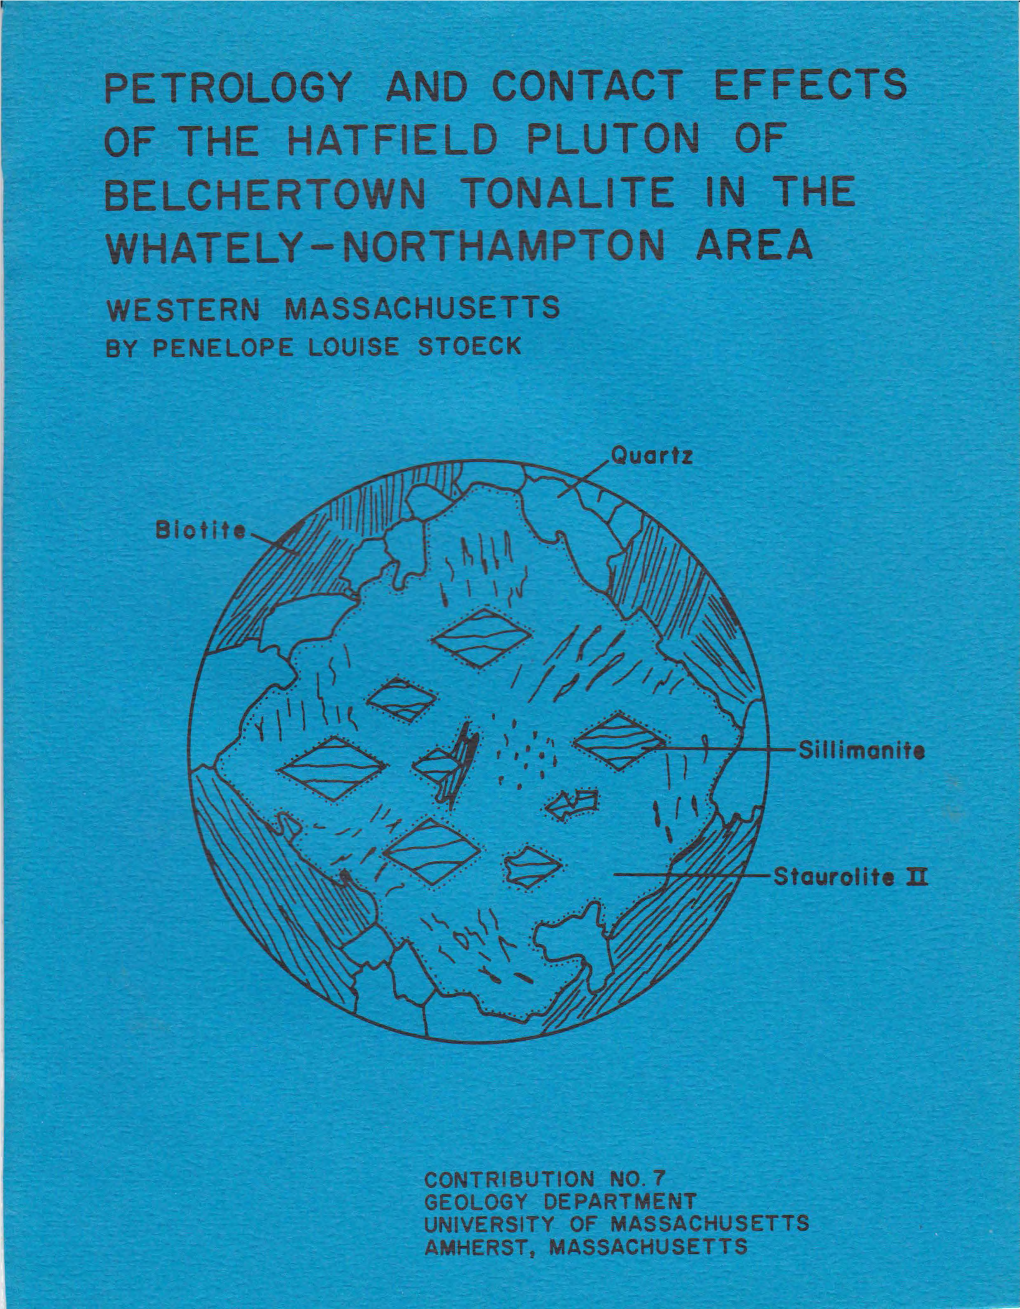 Petrology and Contact Effects of the Hatfield Pluton of Belchertown